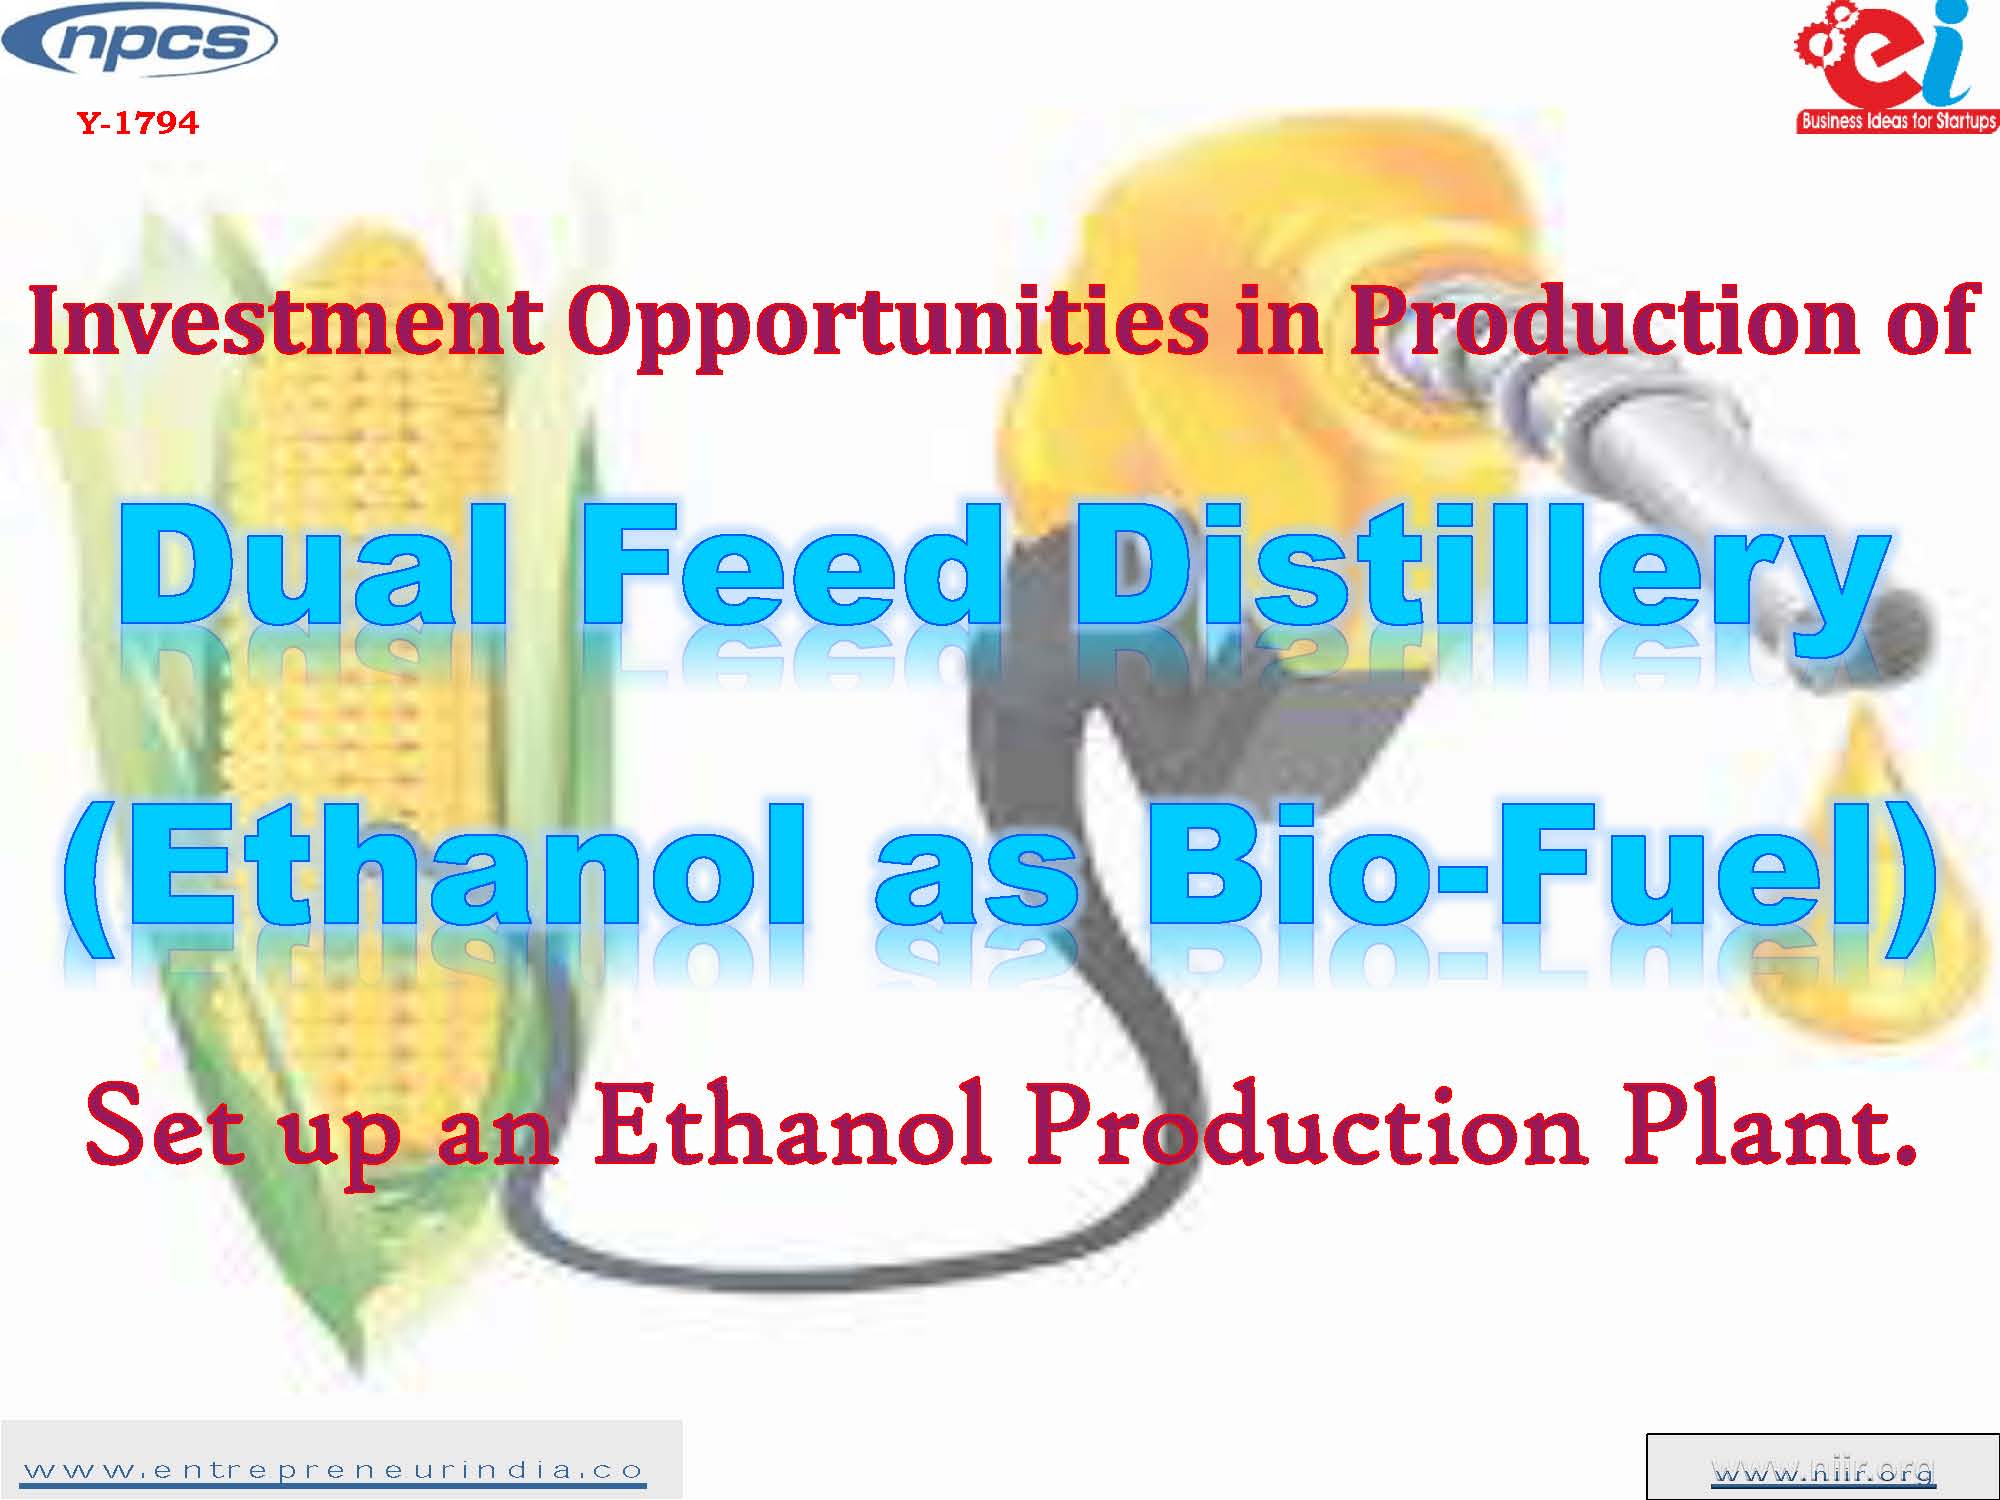 Investment Opportunities in Production of Dual Feed Distillery Ethanol as Bio Fuel Set up an Ethanol Production Plant